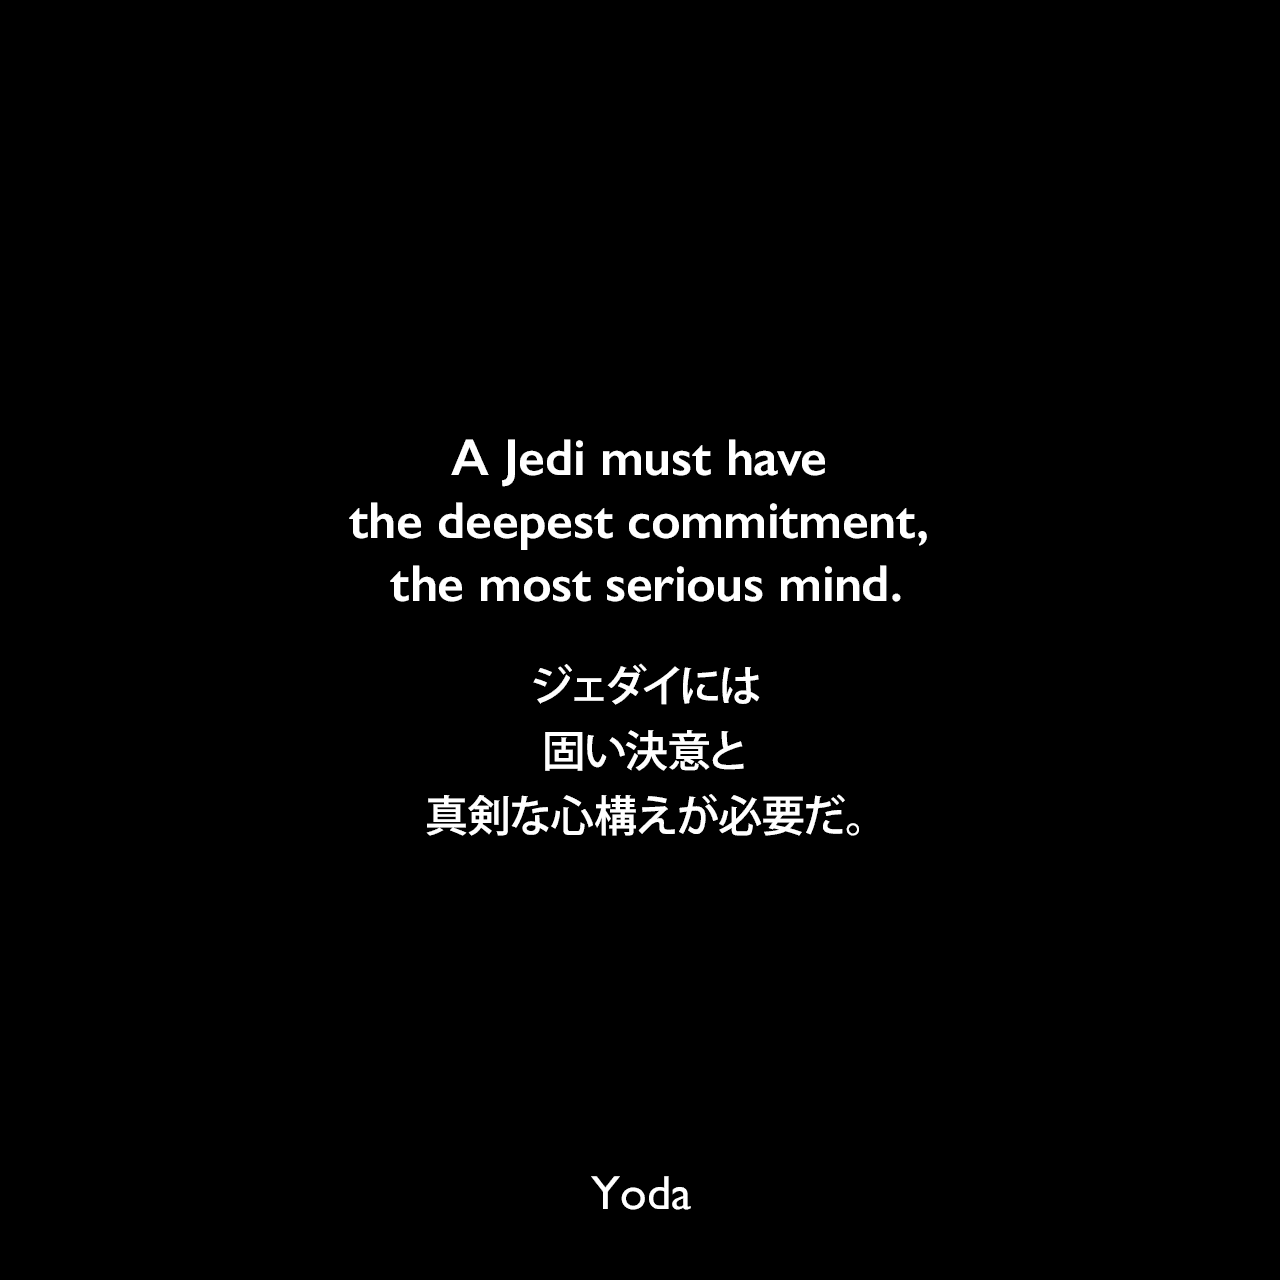 A Jedi must have the deepest commitment, the most serious mind.ジェダイには固い決意と真剣な心構えが必要だ。- スター・ウォーズ エピソード5/帝国の逆襲Yoda